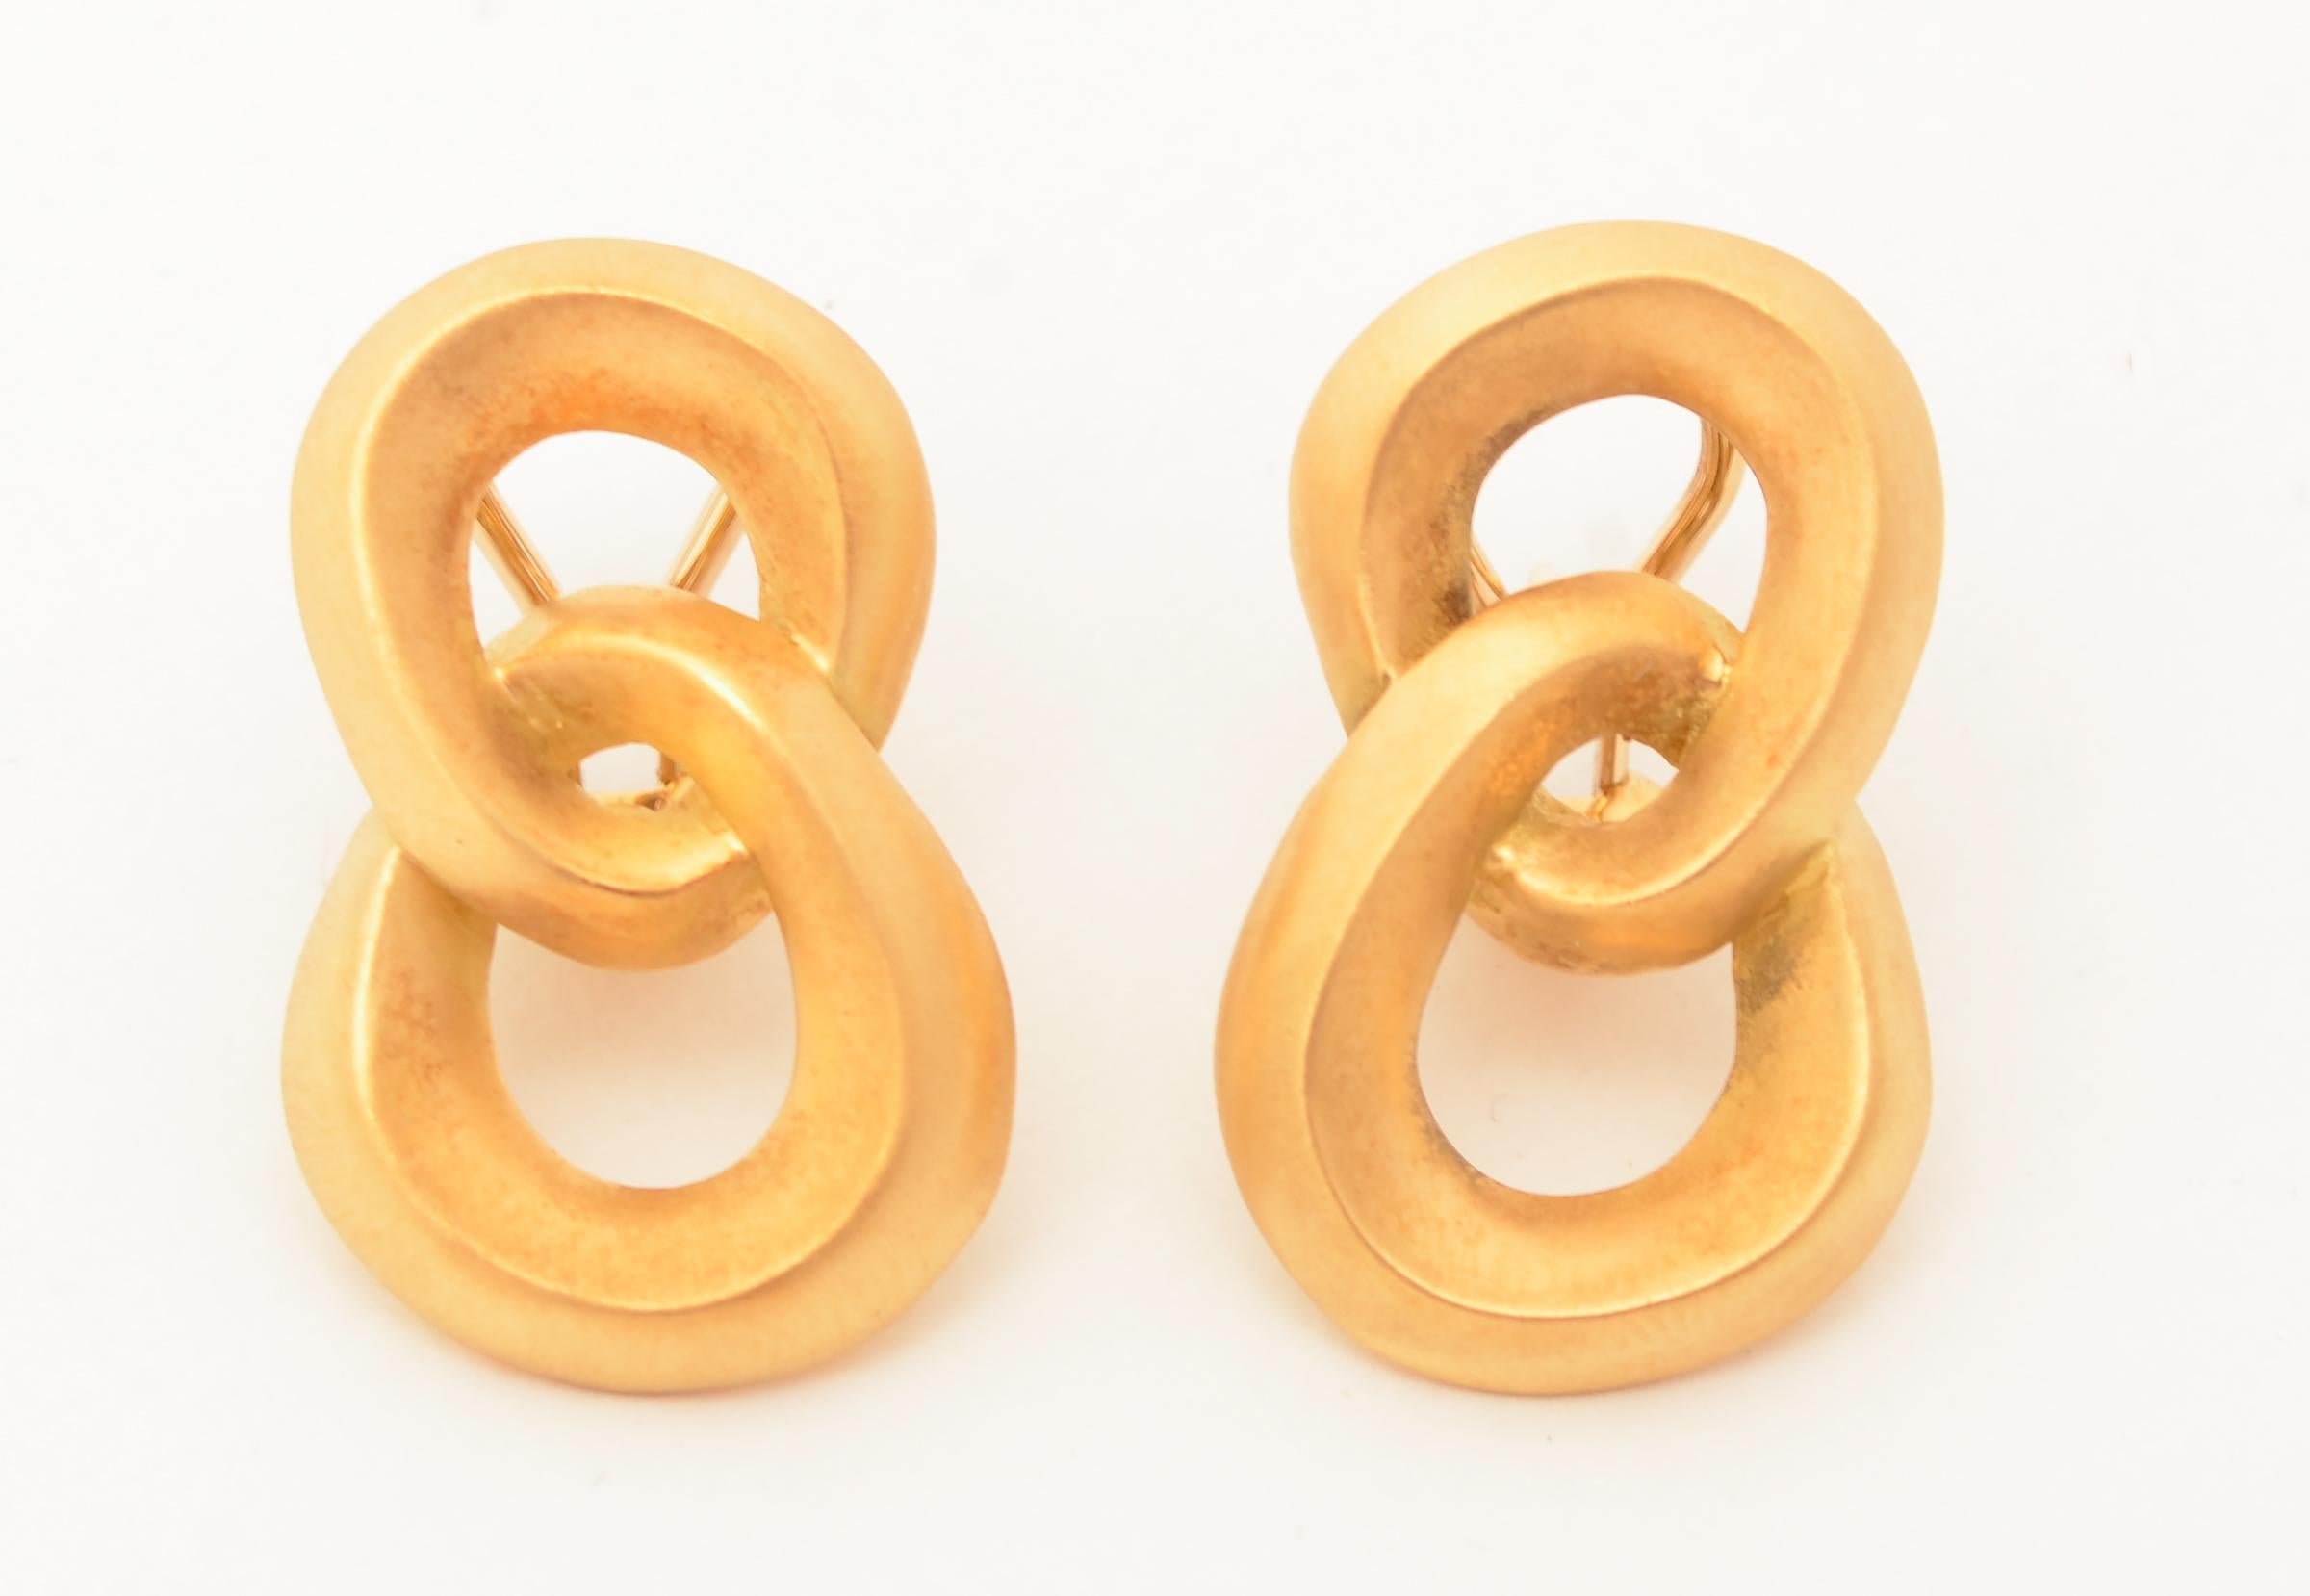 Double loop earrings by Angela Cummings in 18 karat gold with a matte finish. The irregularly shaped, intertwining hoops are of slightly different sizes with the bottom a hair larger than the top.
Omega backs; dated 1986.
Angela Cummings began